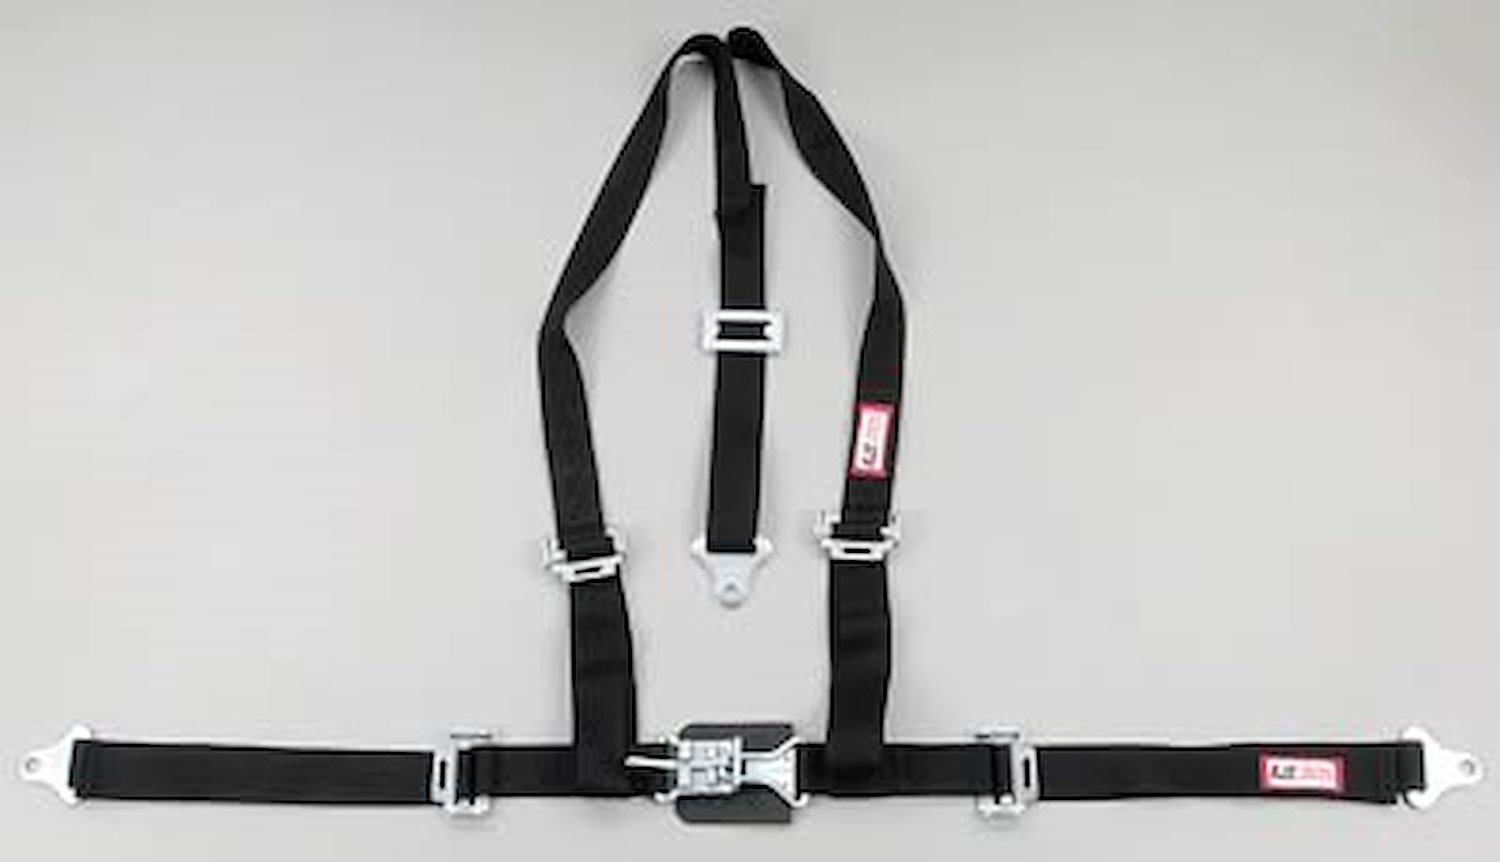 NON-SFI L&L HARNESS 2 PULL DOWN Lap Belt w/Adjuster 2 S.H. Y FLOOR MOUNT w/STERNUM STRAP ALL WRAP ENDS RED